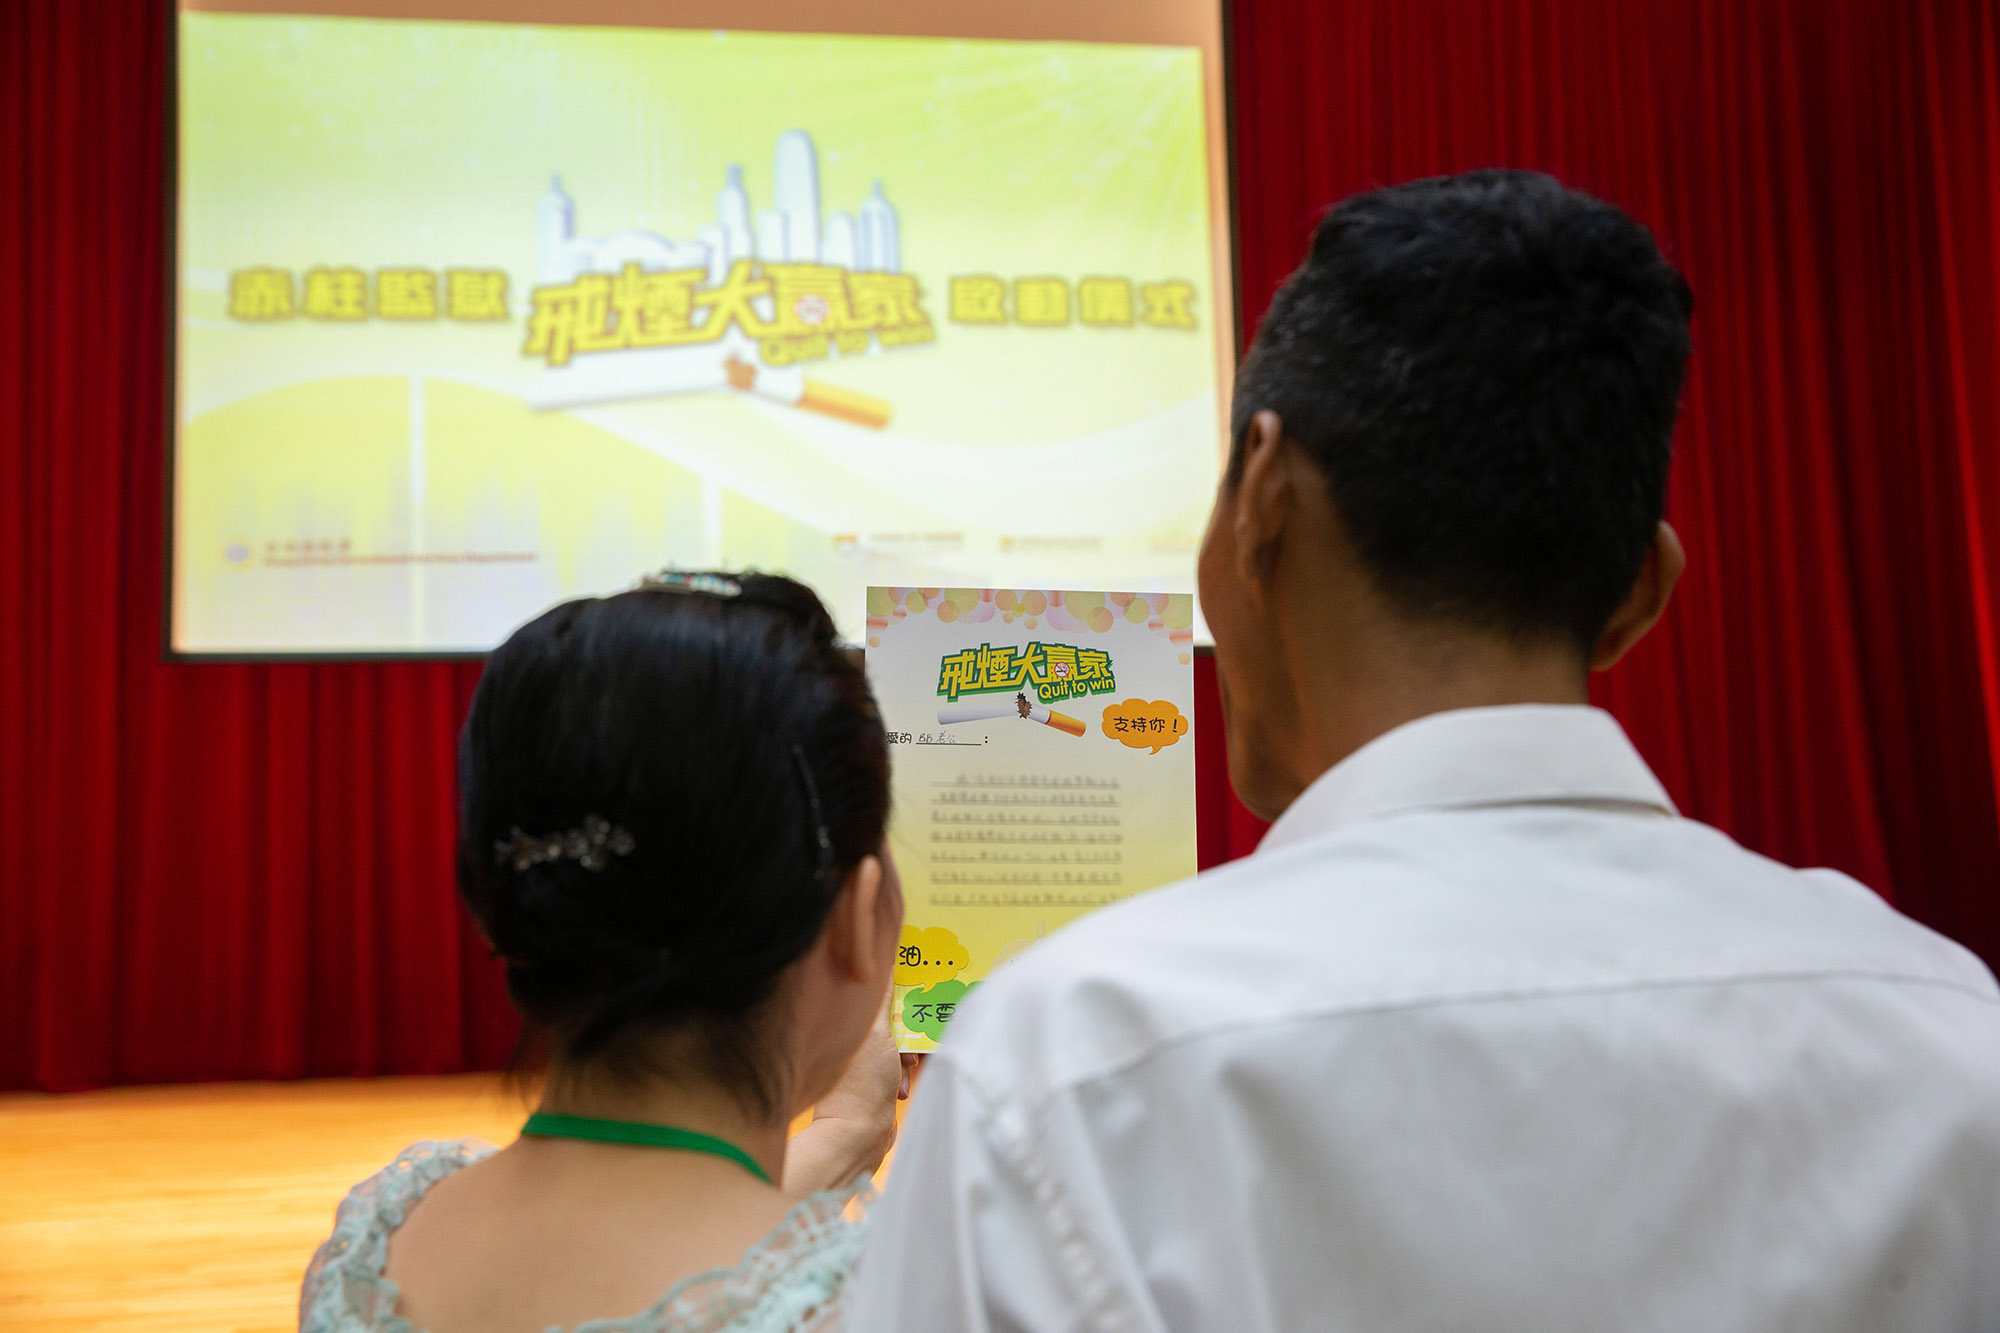 The Department cooperated with the Hong Kong Council on Smoking and Health for arranging persons in custody to participate in the “Quit to Win” Smoke-free Community Campaign.